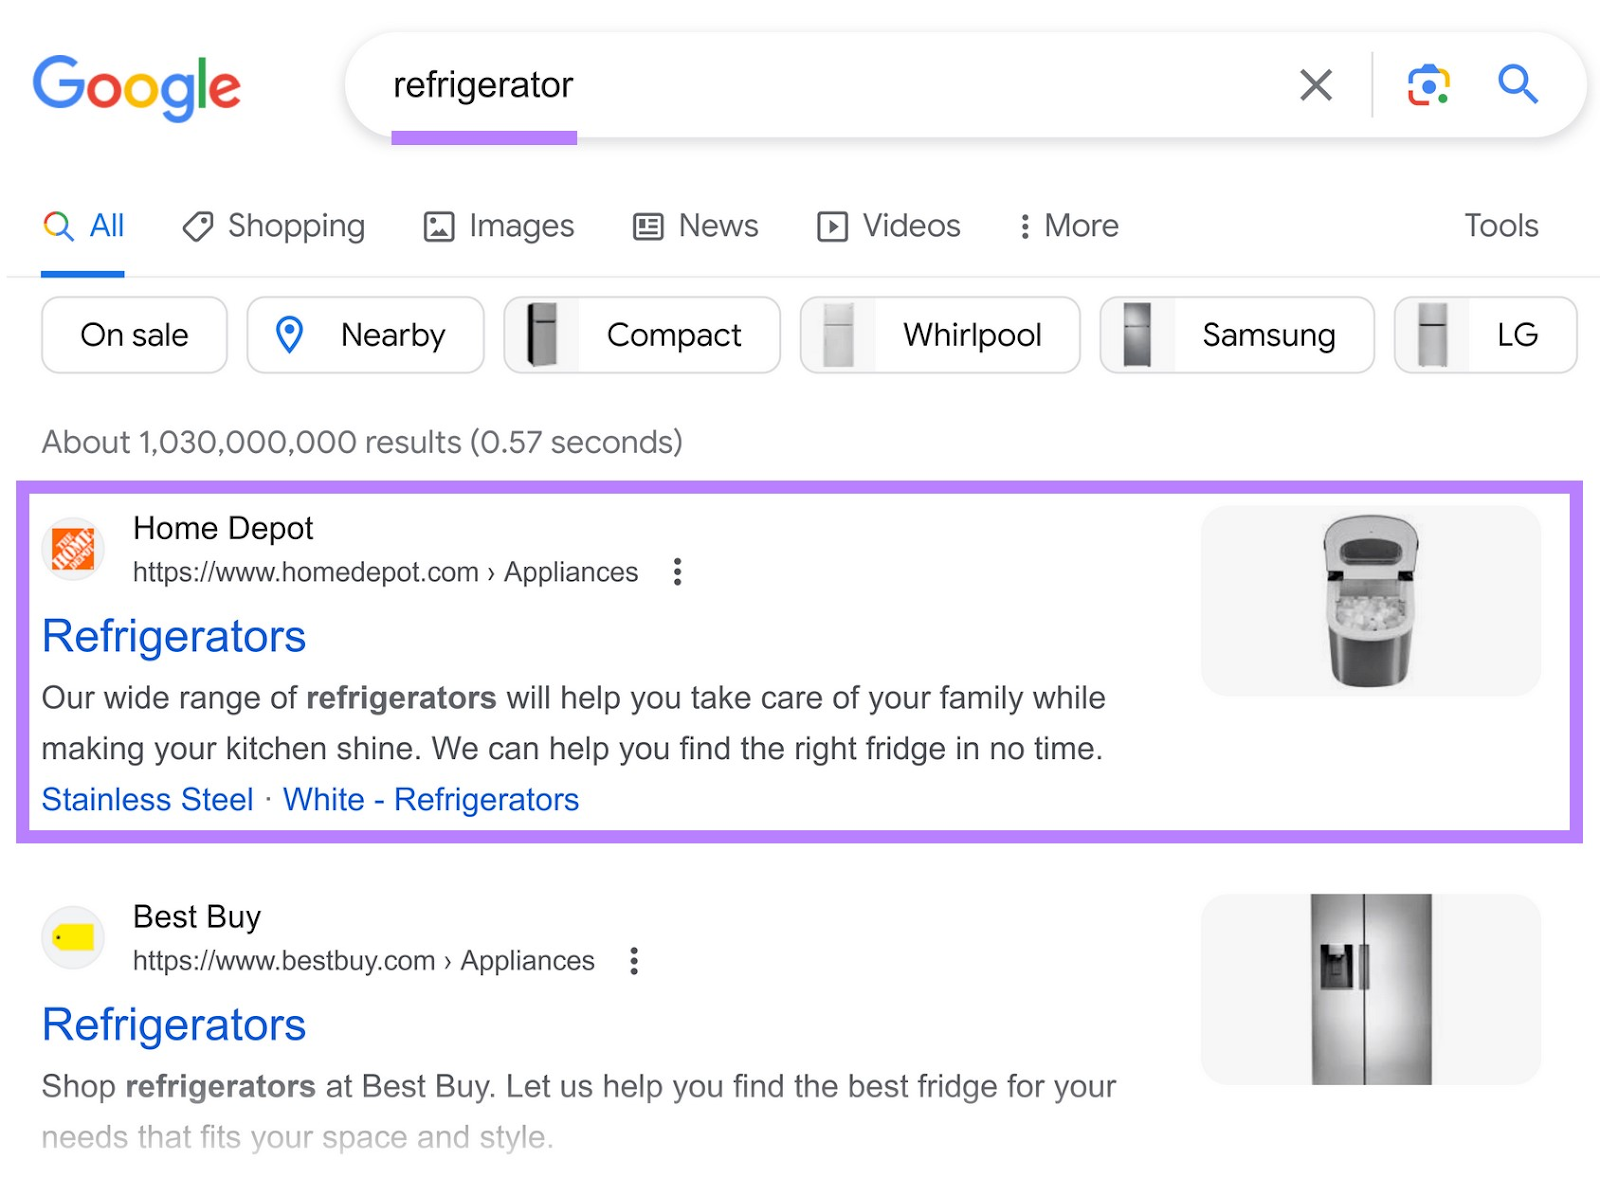 an example of Google search results for "refrigerator" with Home Depot being the first